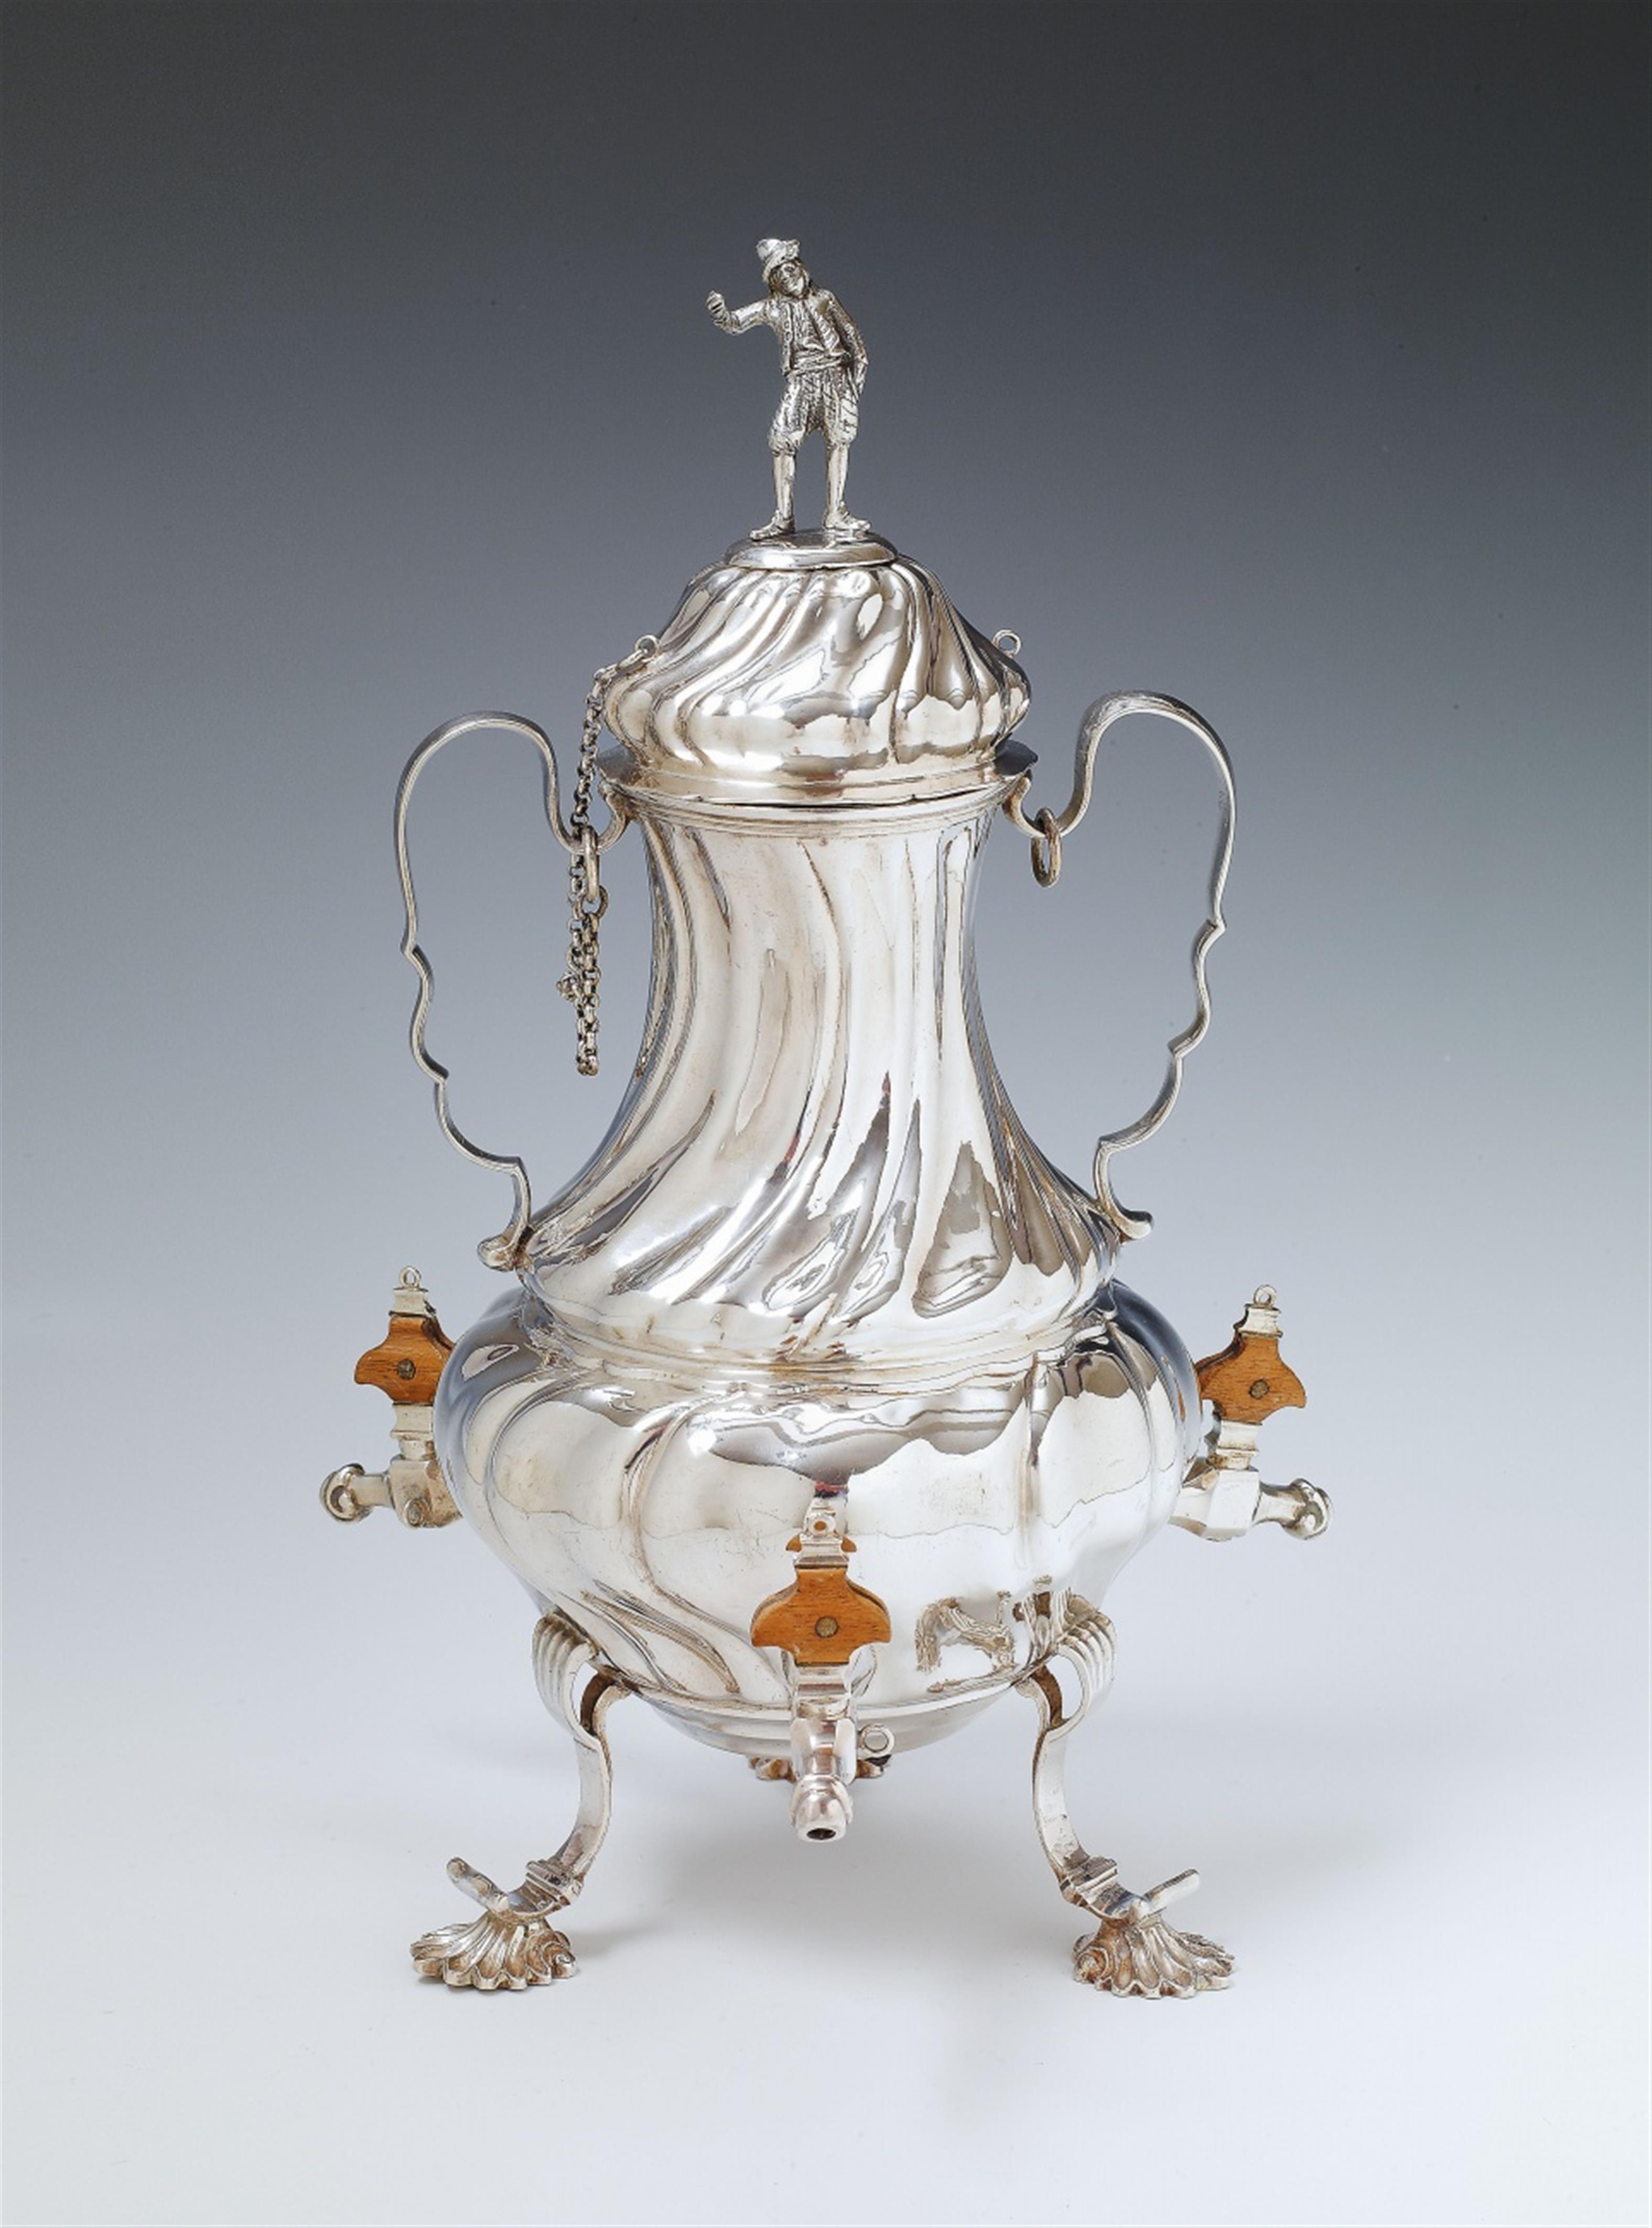 An Augsburg silver coffee urn with three wooden handled taps. Marks of Johann Georg Kloss(e), 1747 - 49. - 